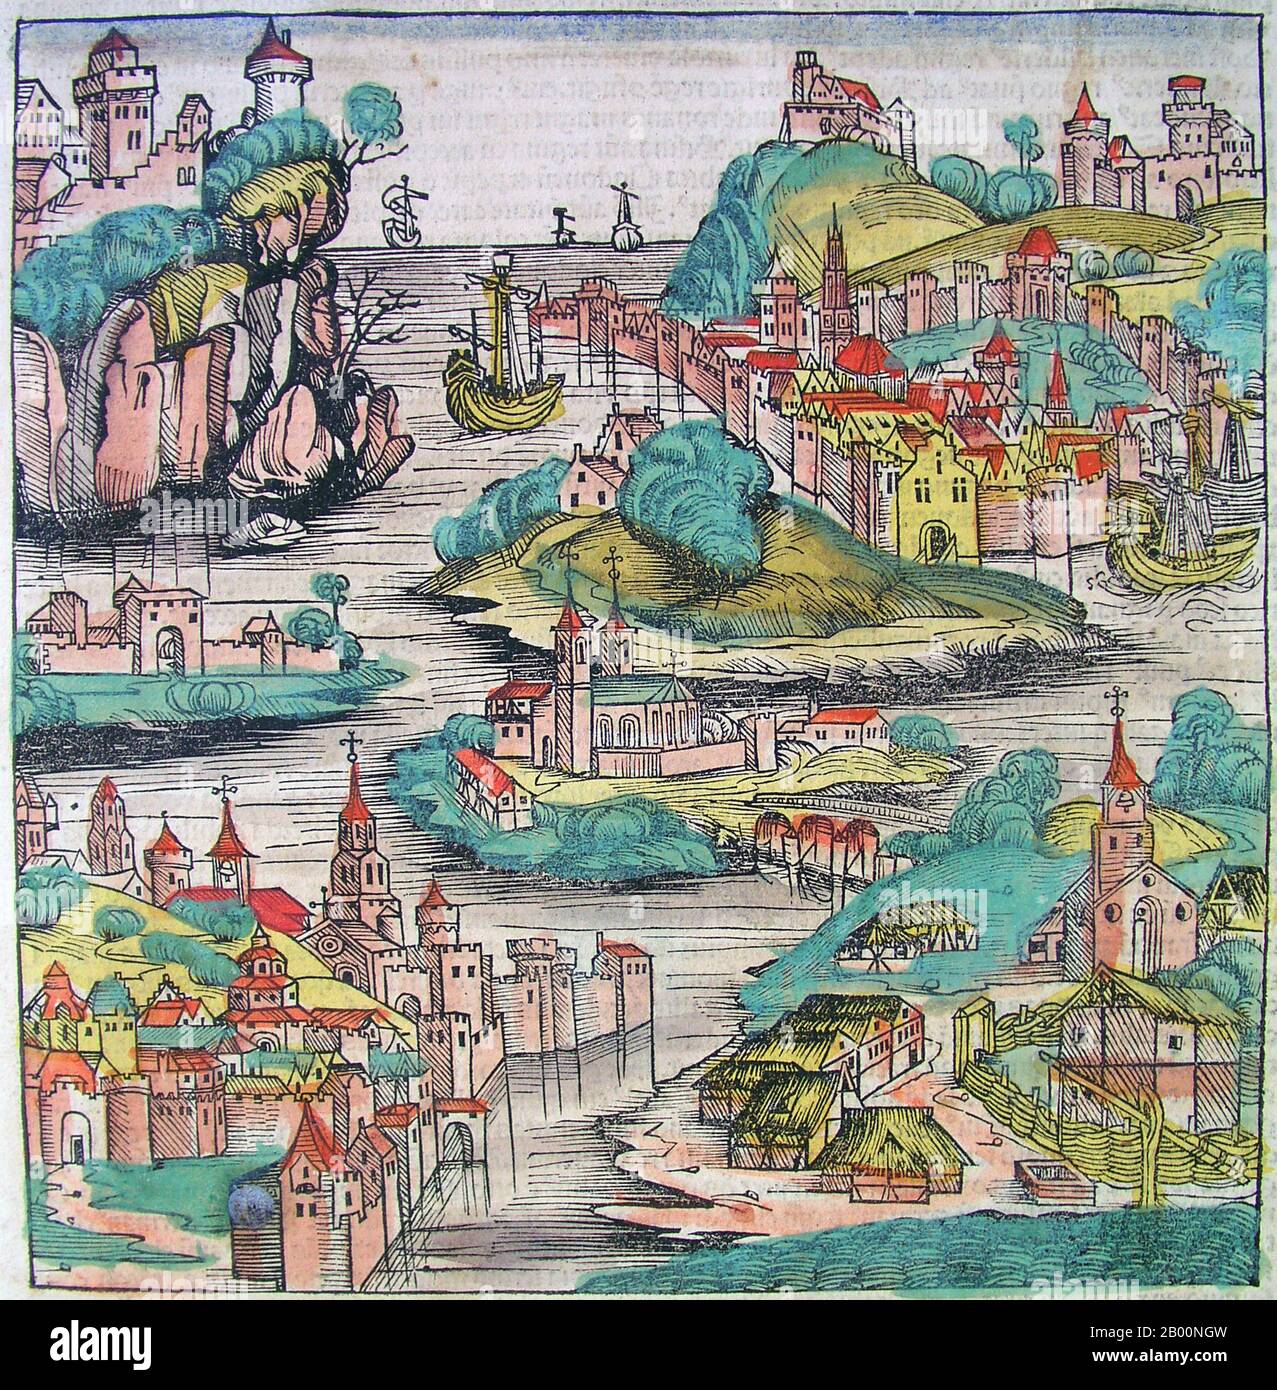 Germany: 'Franconia'. The Nuremberg Chronicle, by Hartmann Schedel (1440-1514), 1493.  The Nuremberg Chronicle is an illustrated world history. Its structure follows the story of human history as related in the Bible, including the histories of a number of important Western cities. Written in Latin by Hartmann Schedel, with a version in German translation by Georg Alt, it appeared in 1493. It is one of the best-documented early printed books. It is classified as an incunabulum, a book, pamphlet, or broadside that was printed (not handwritten) before the year 1501 in Europe. Stock Photo